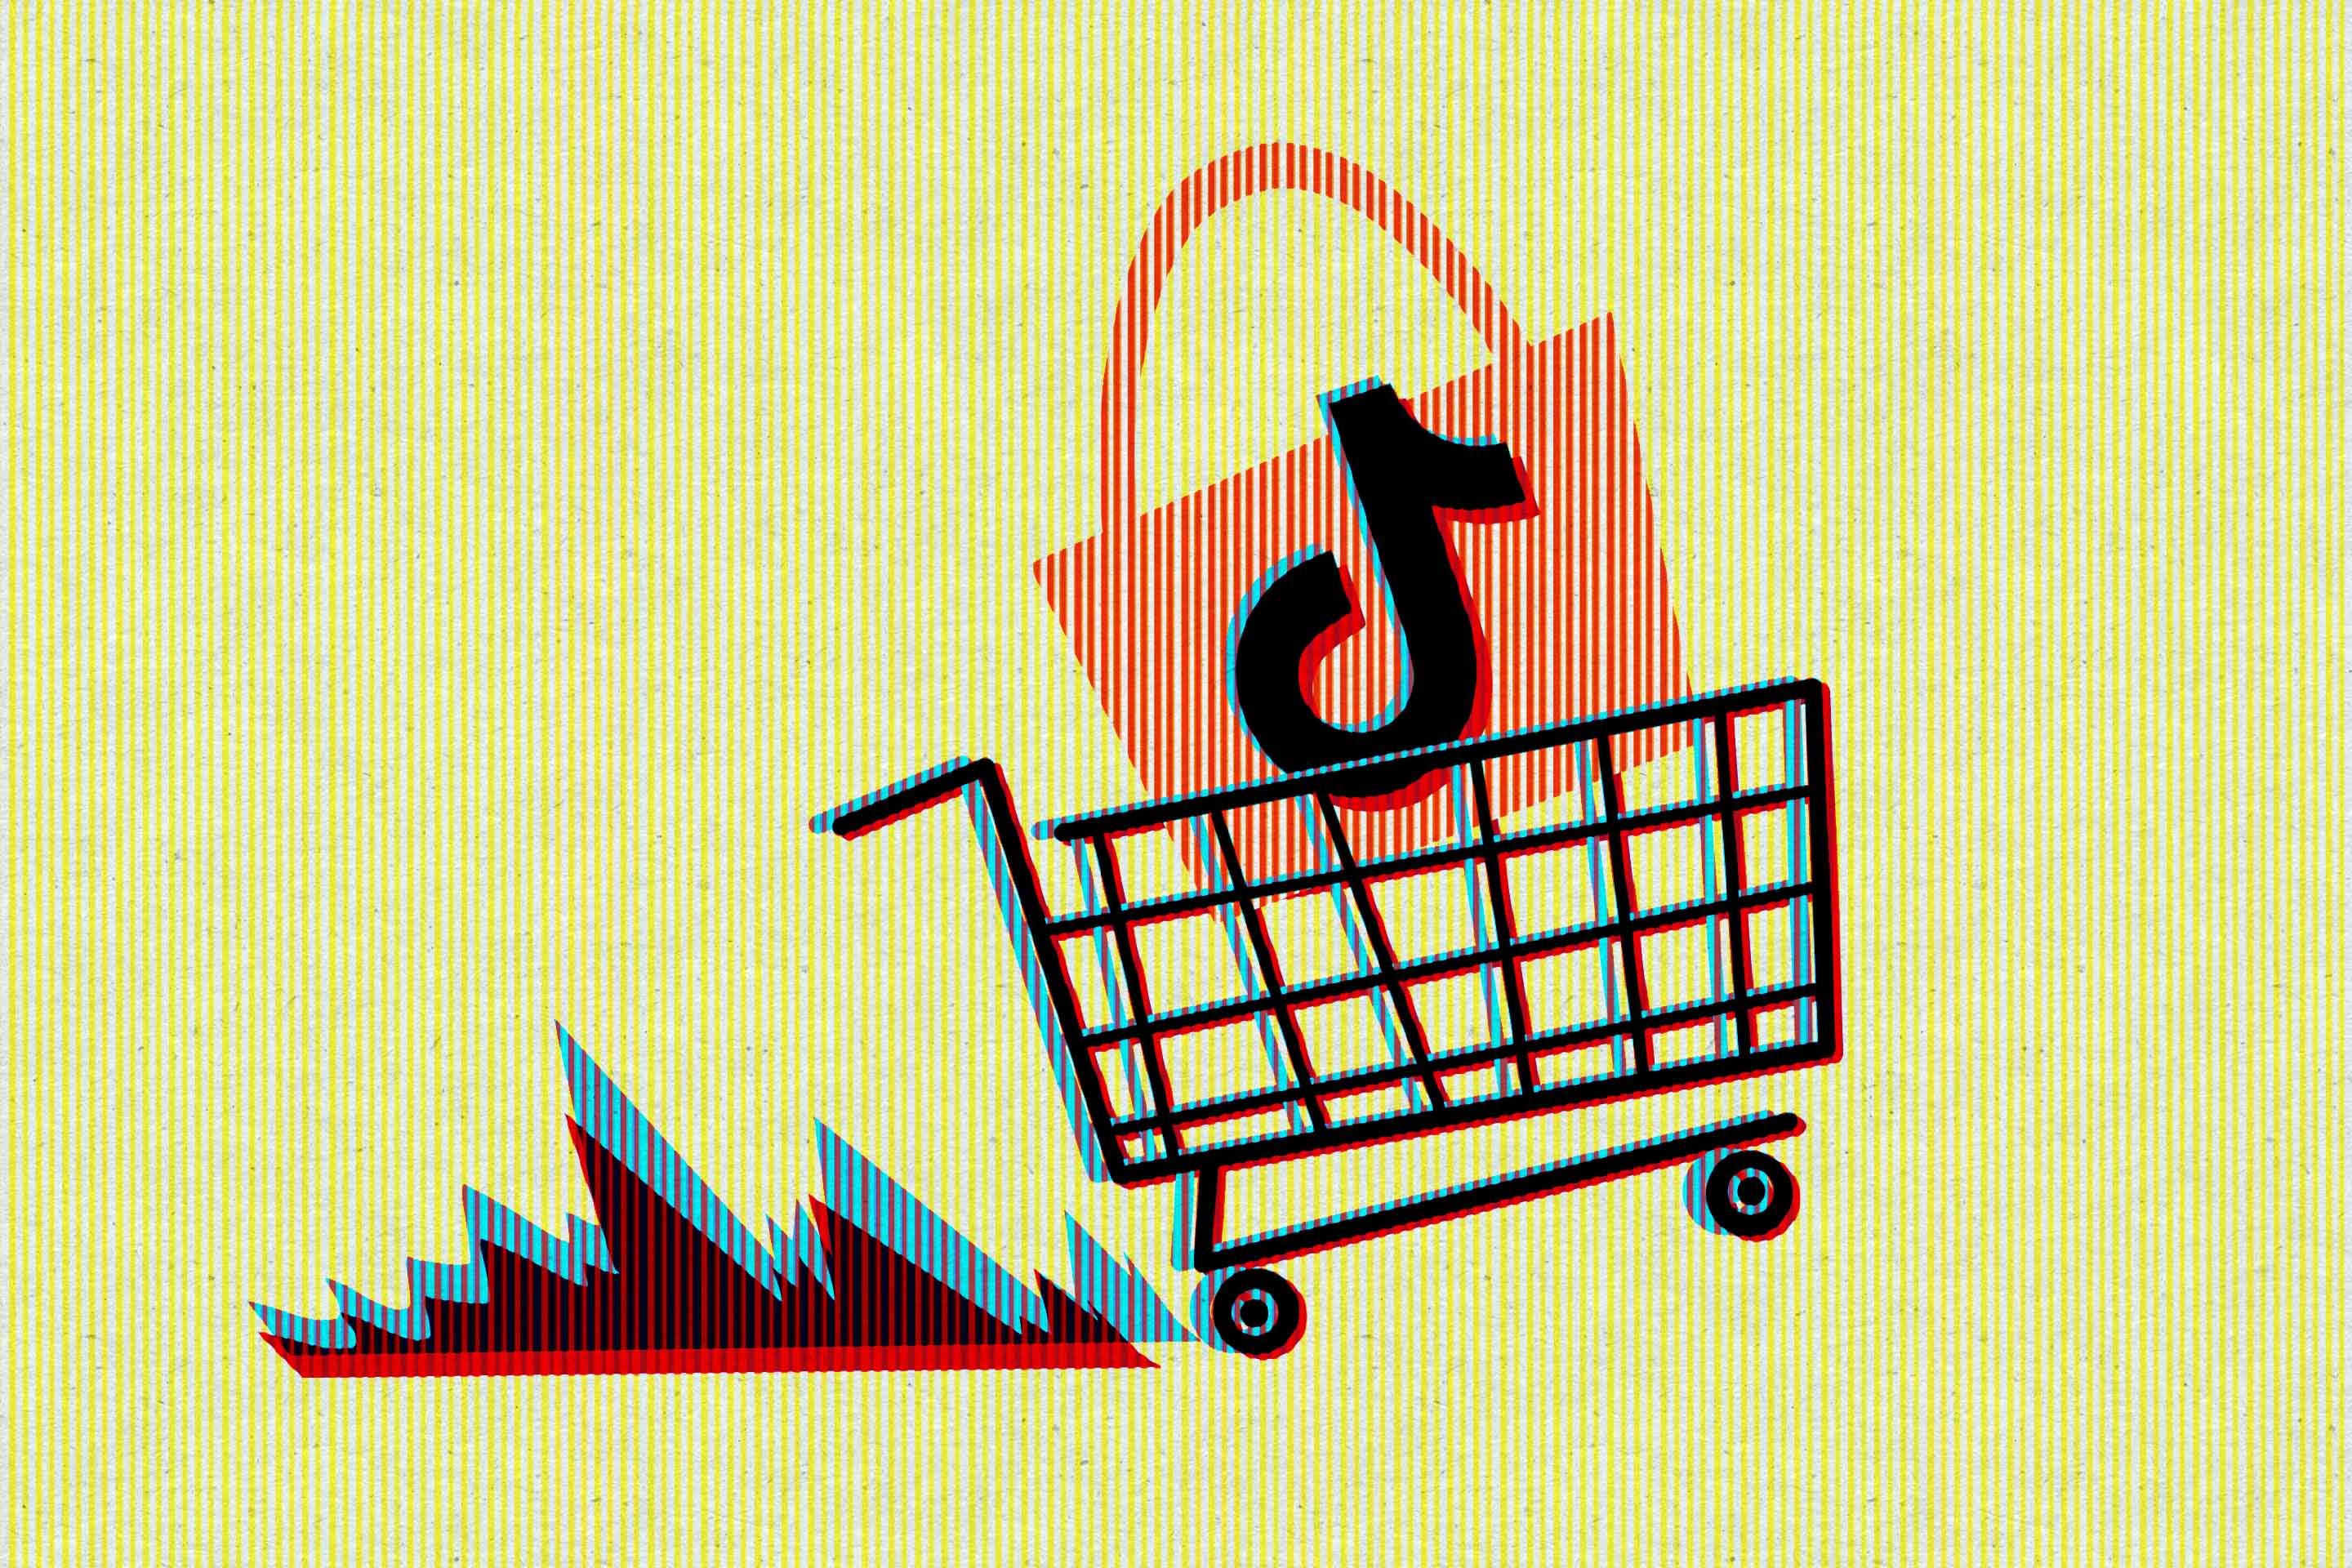 Is TikTok Shop Safe? What to Know Before You Buy